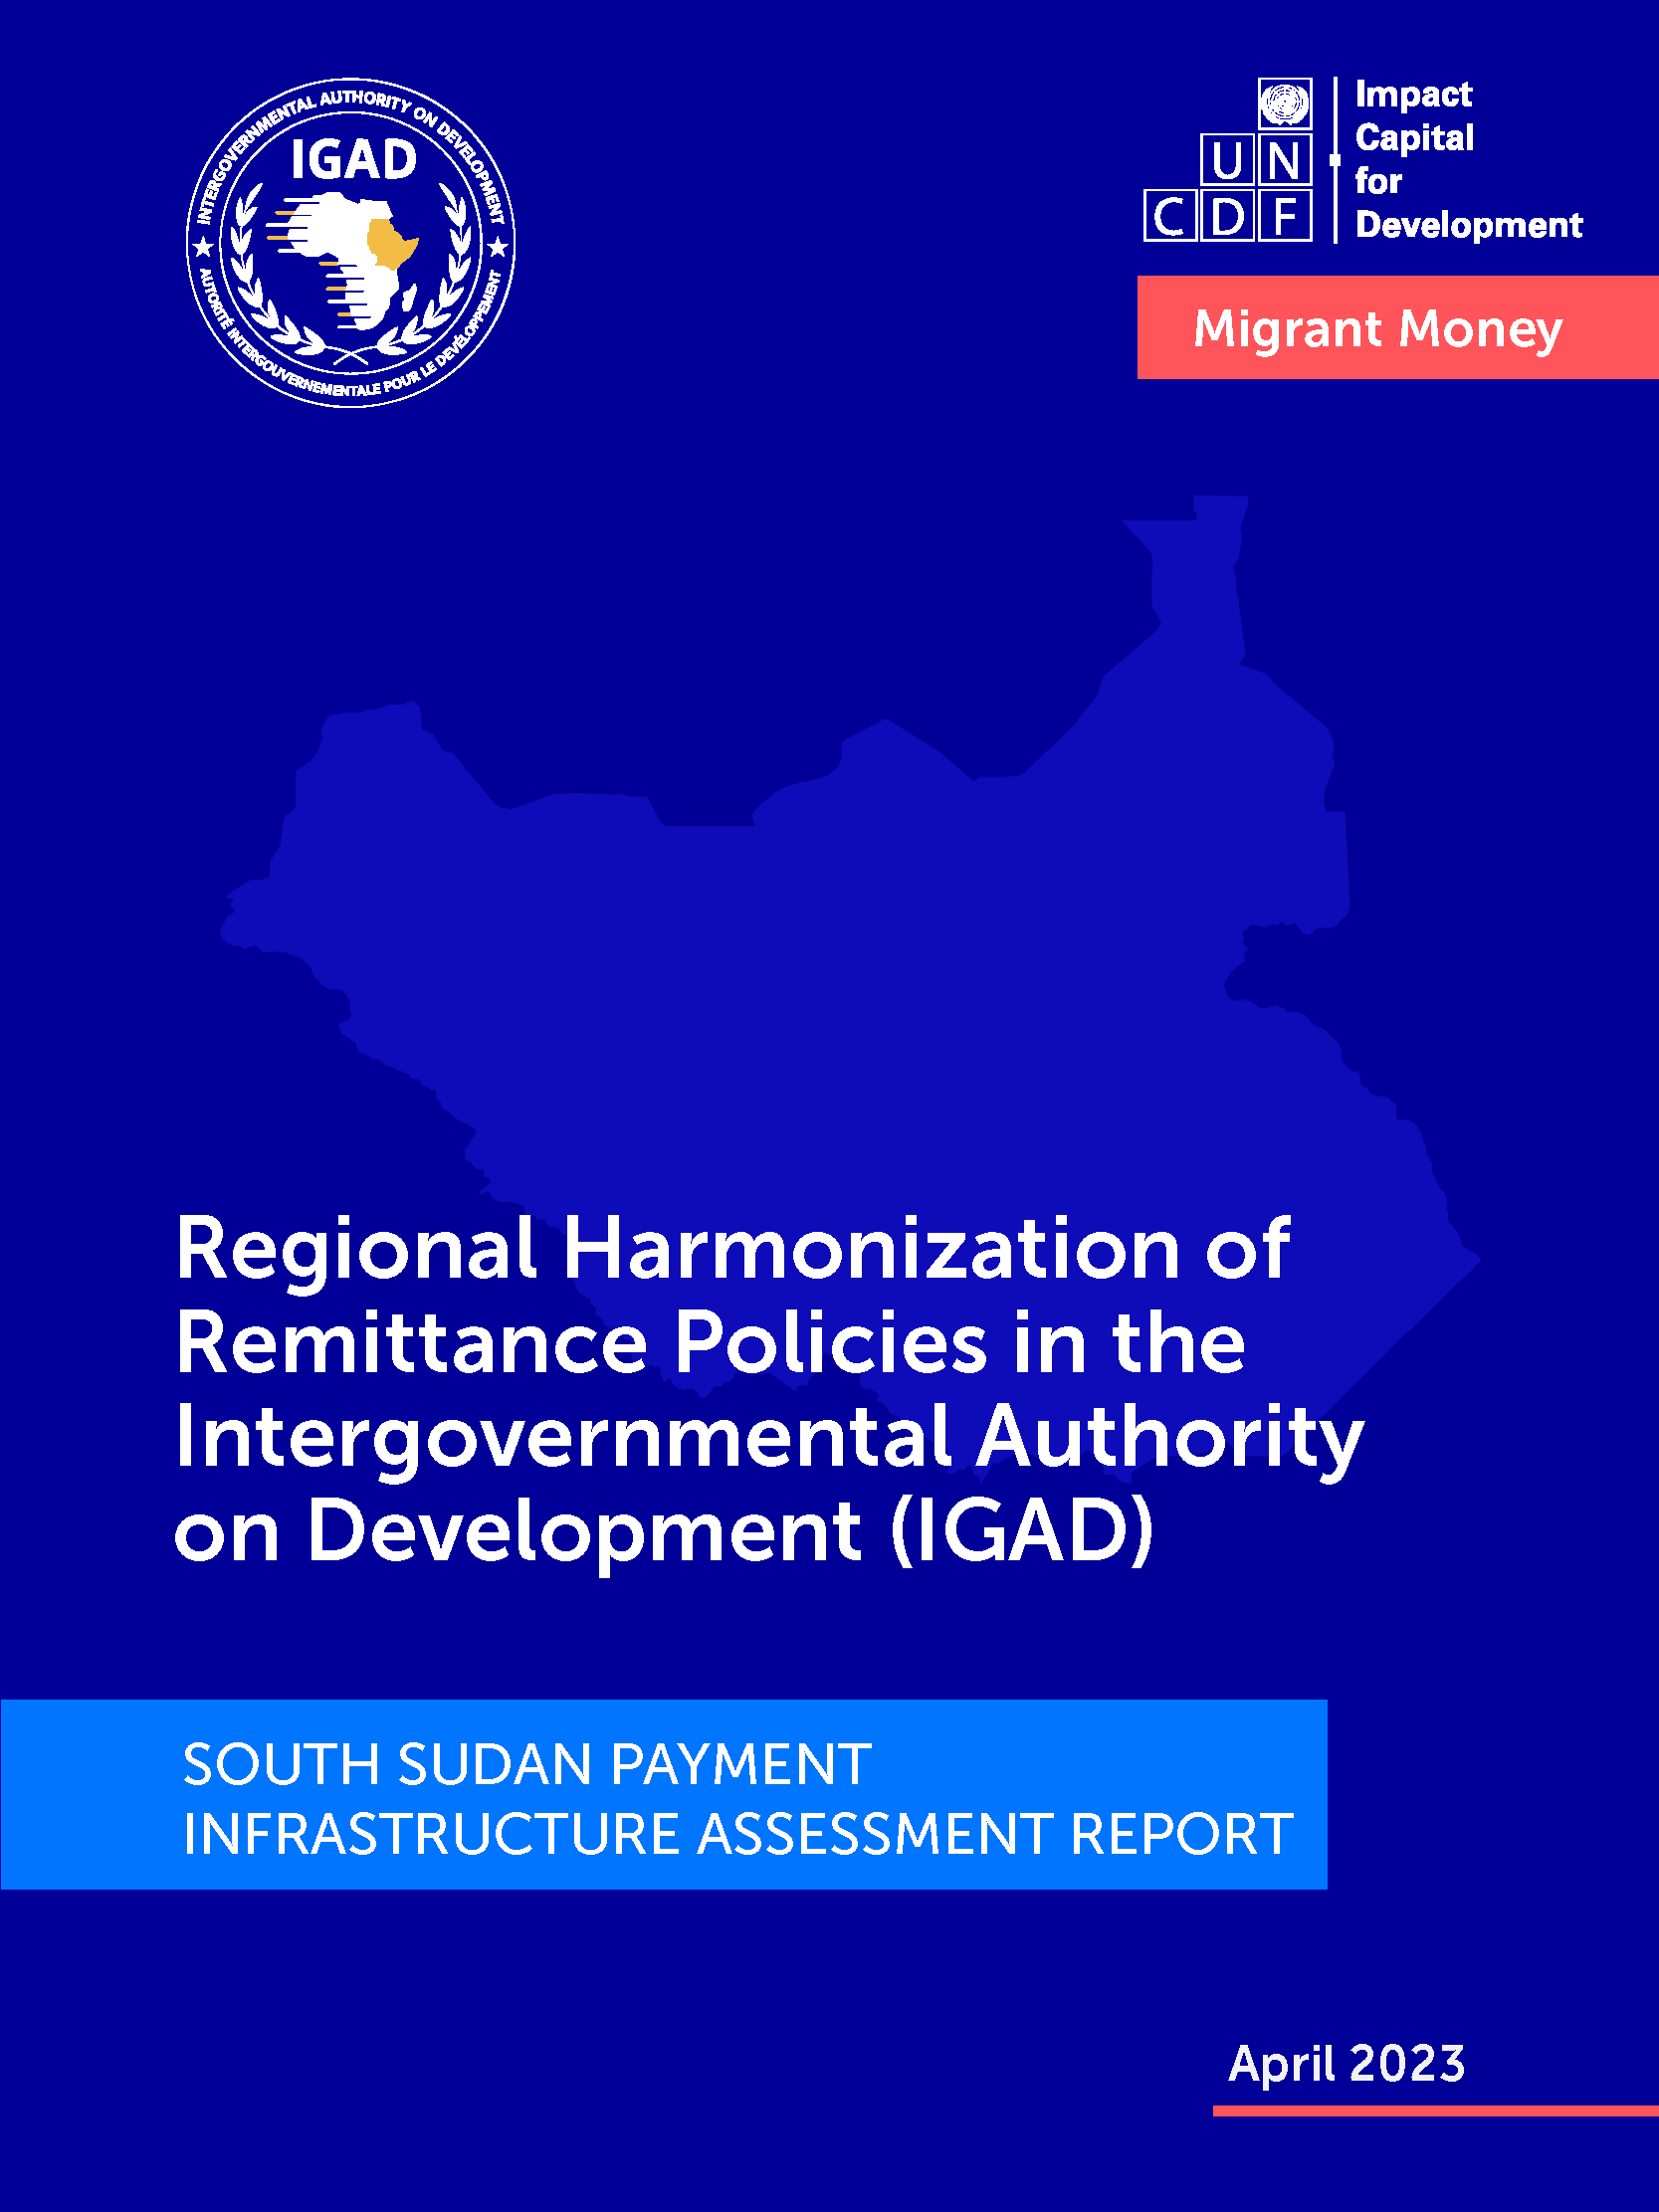 South Sudan Payment Infrastructure Assessment Report: Regional Harmonization of Remittance Policies in IGAD